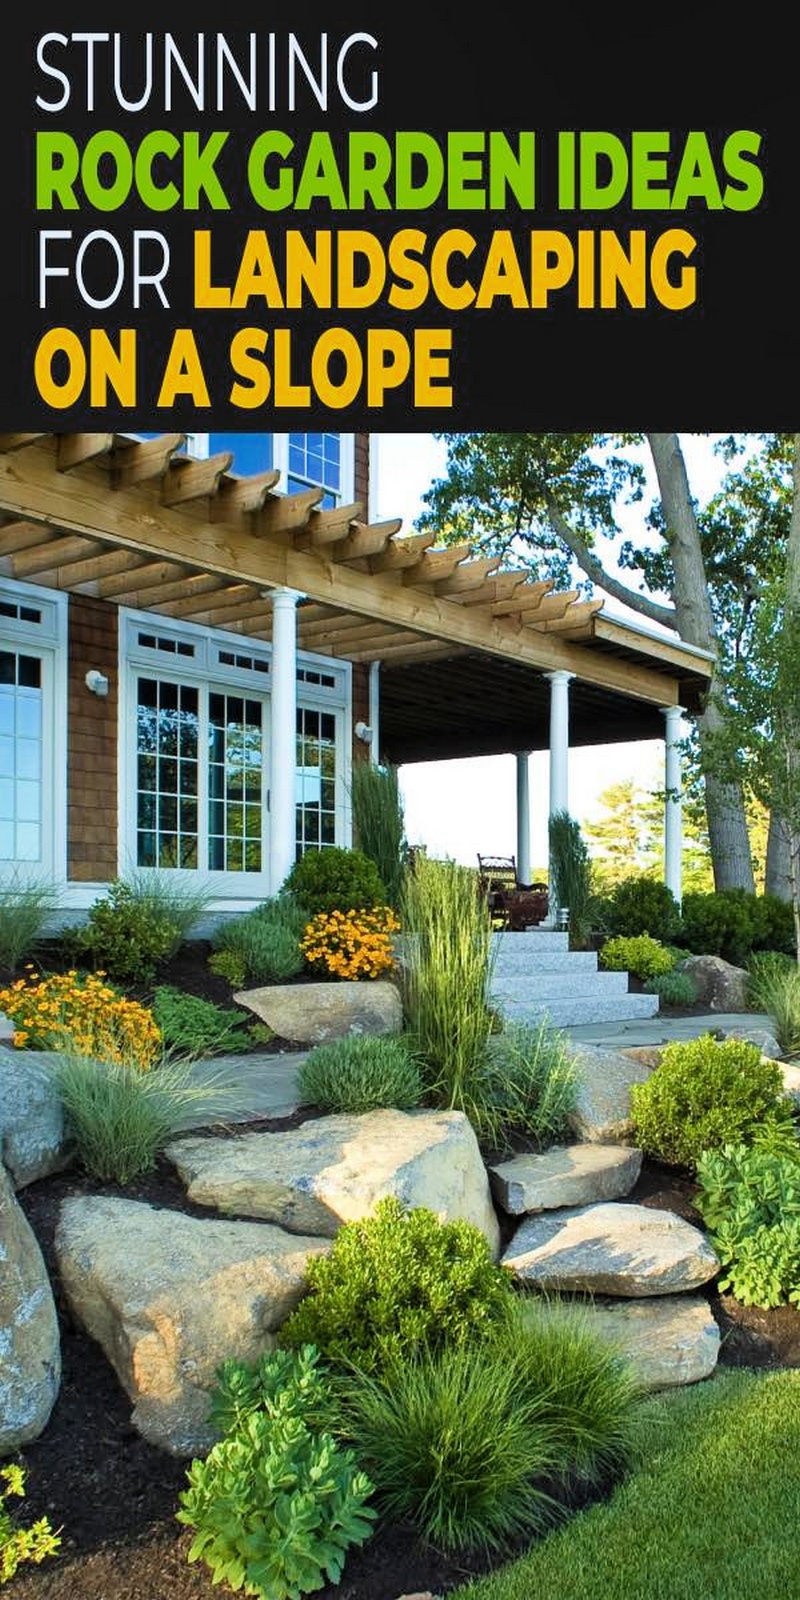 Stunning Rock Garden Ideas For Landscaping On A Slope